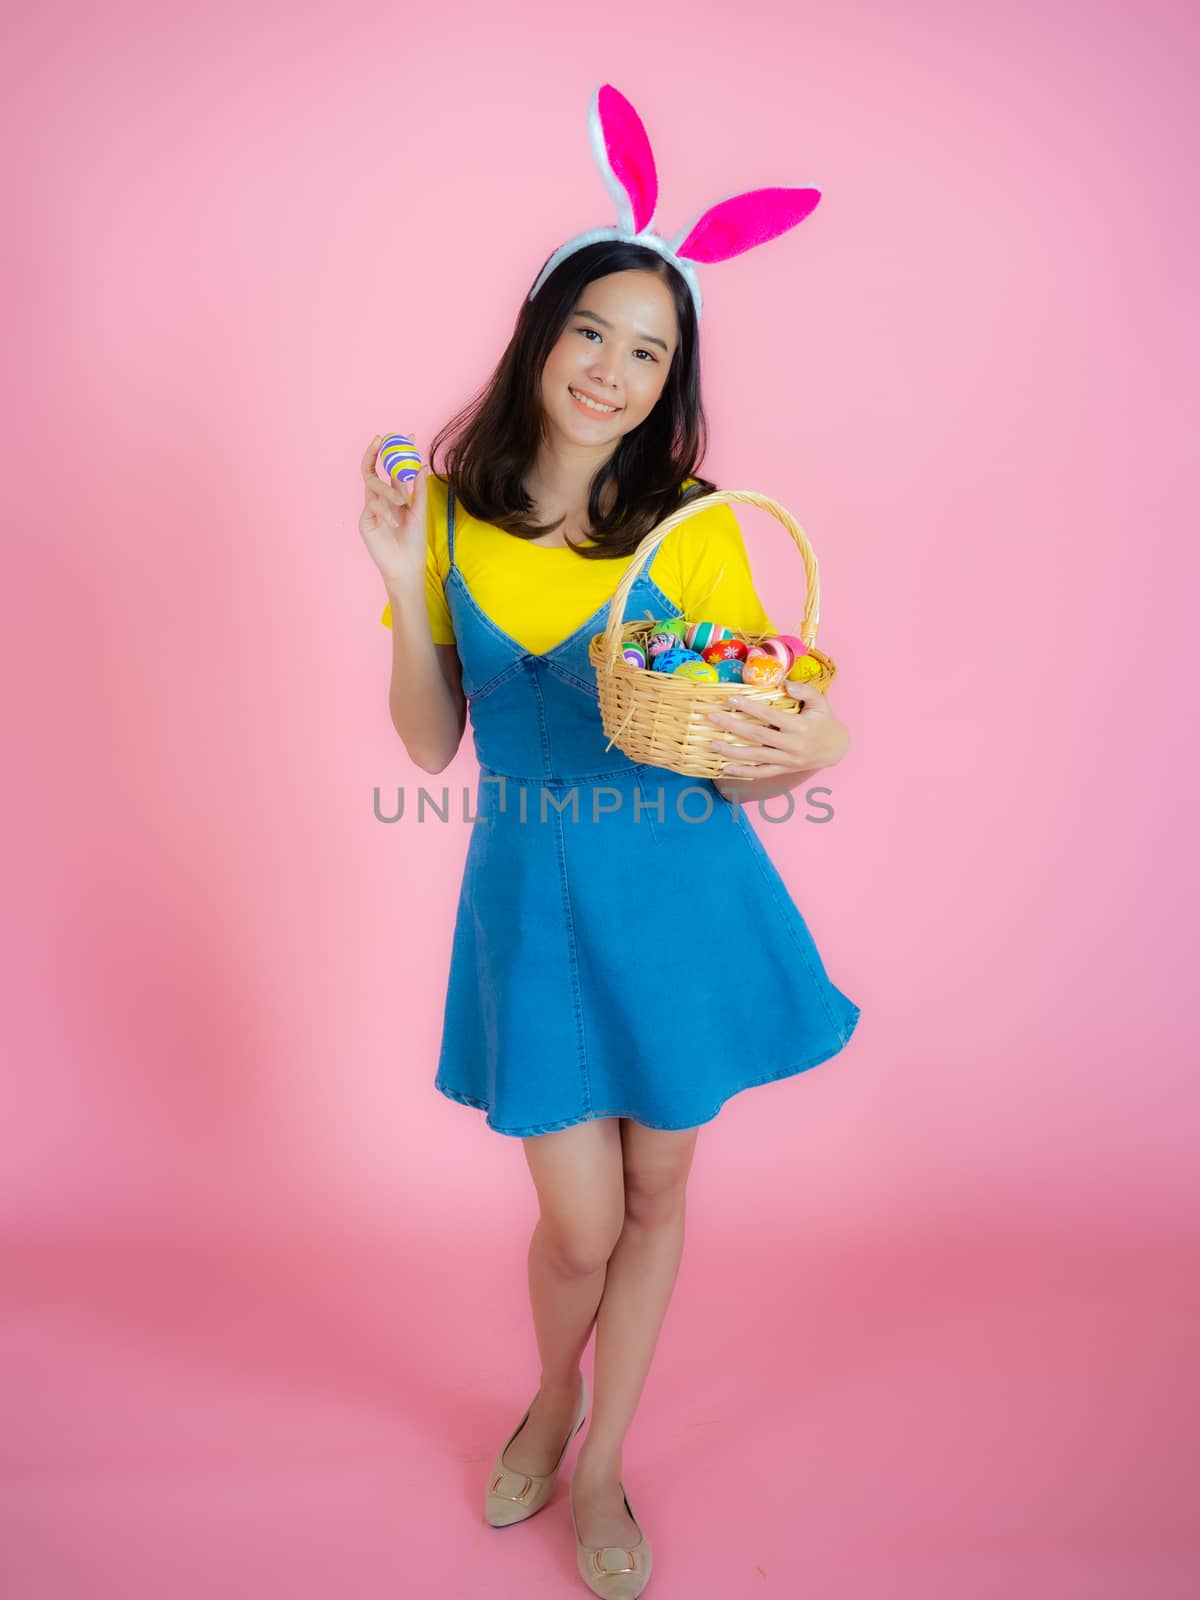 A happy young woman prepares to celebrate Easter by panyajampatong